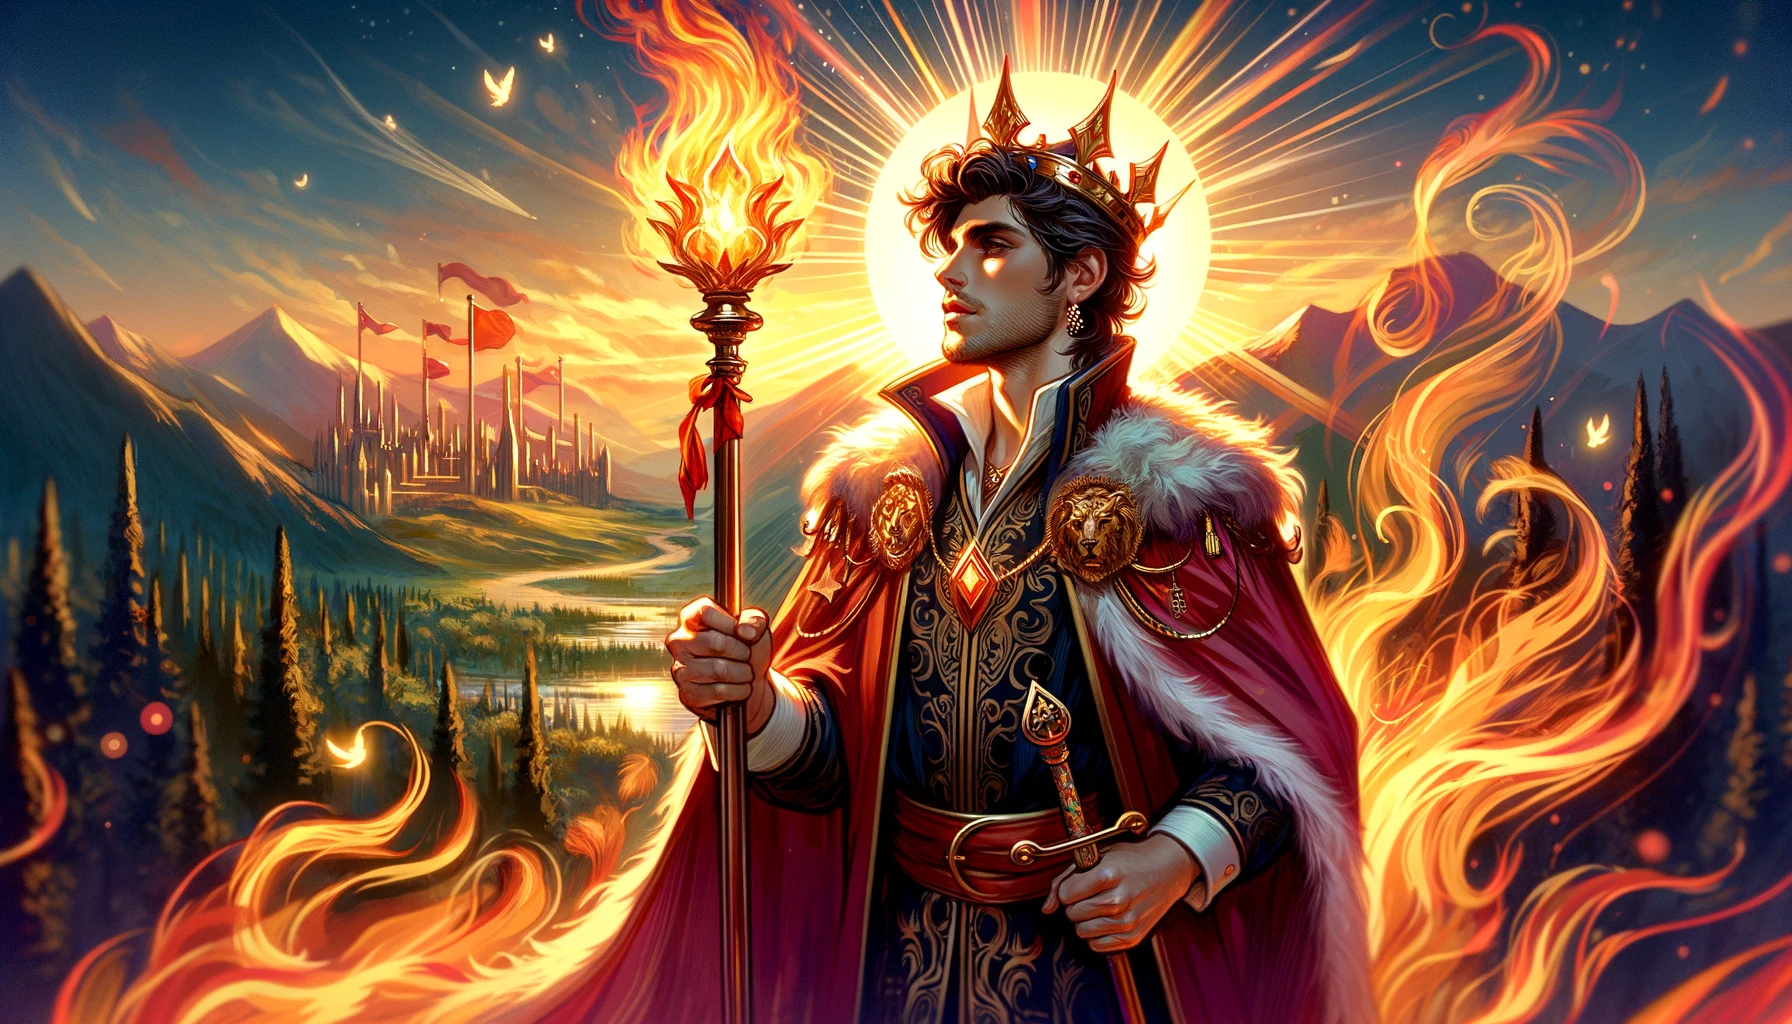 An image overflowing with energy, passion, and determination. The King stands in a commanding pose, surrounded by a vivid backdrop symbolizing his realm of influence. Warm colors reflect his fiery temperament, illustrating his dynamic spirit and visionary nature. This portrayal embodies the inspirational force and leadership qualities associated with the King of Wands in tarot readings.